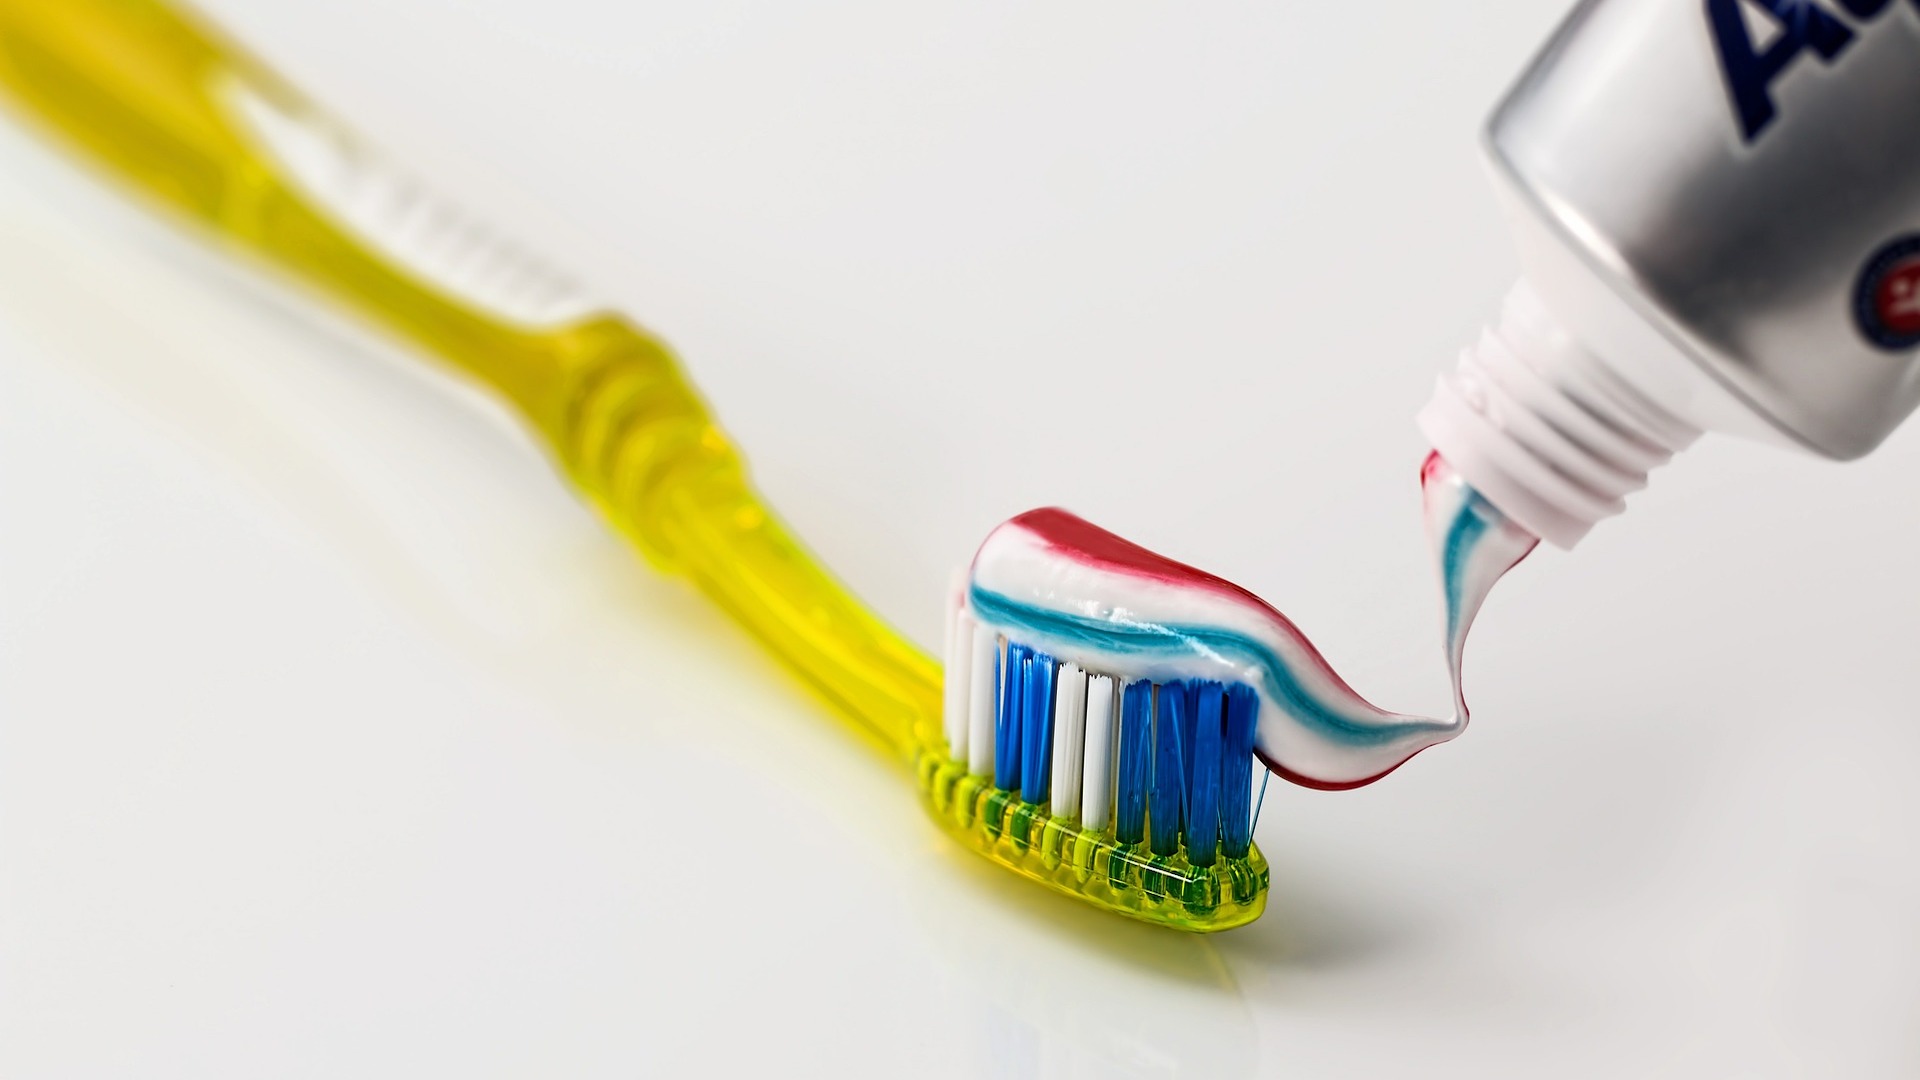 A toothbrush and toothpaste